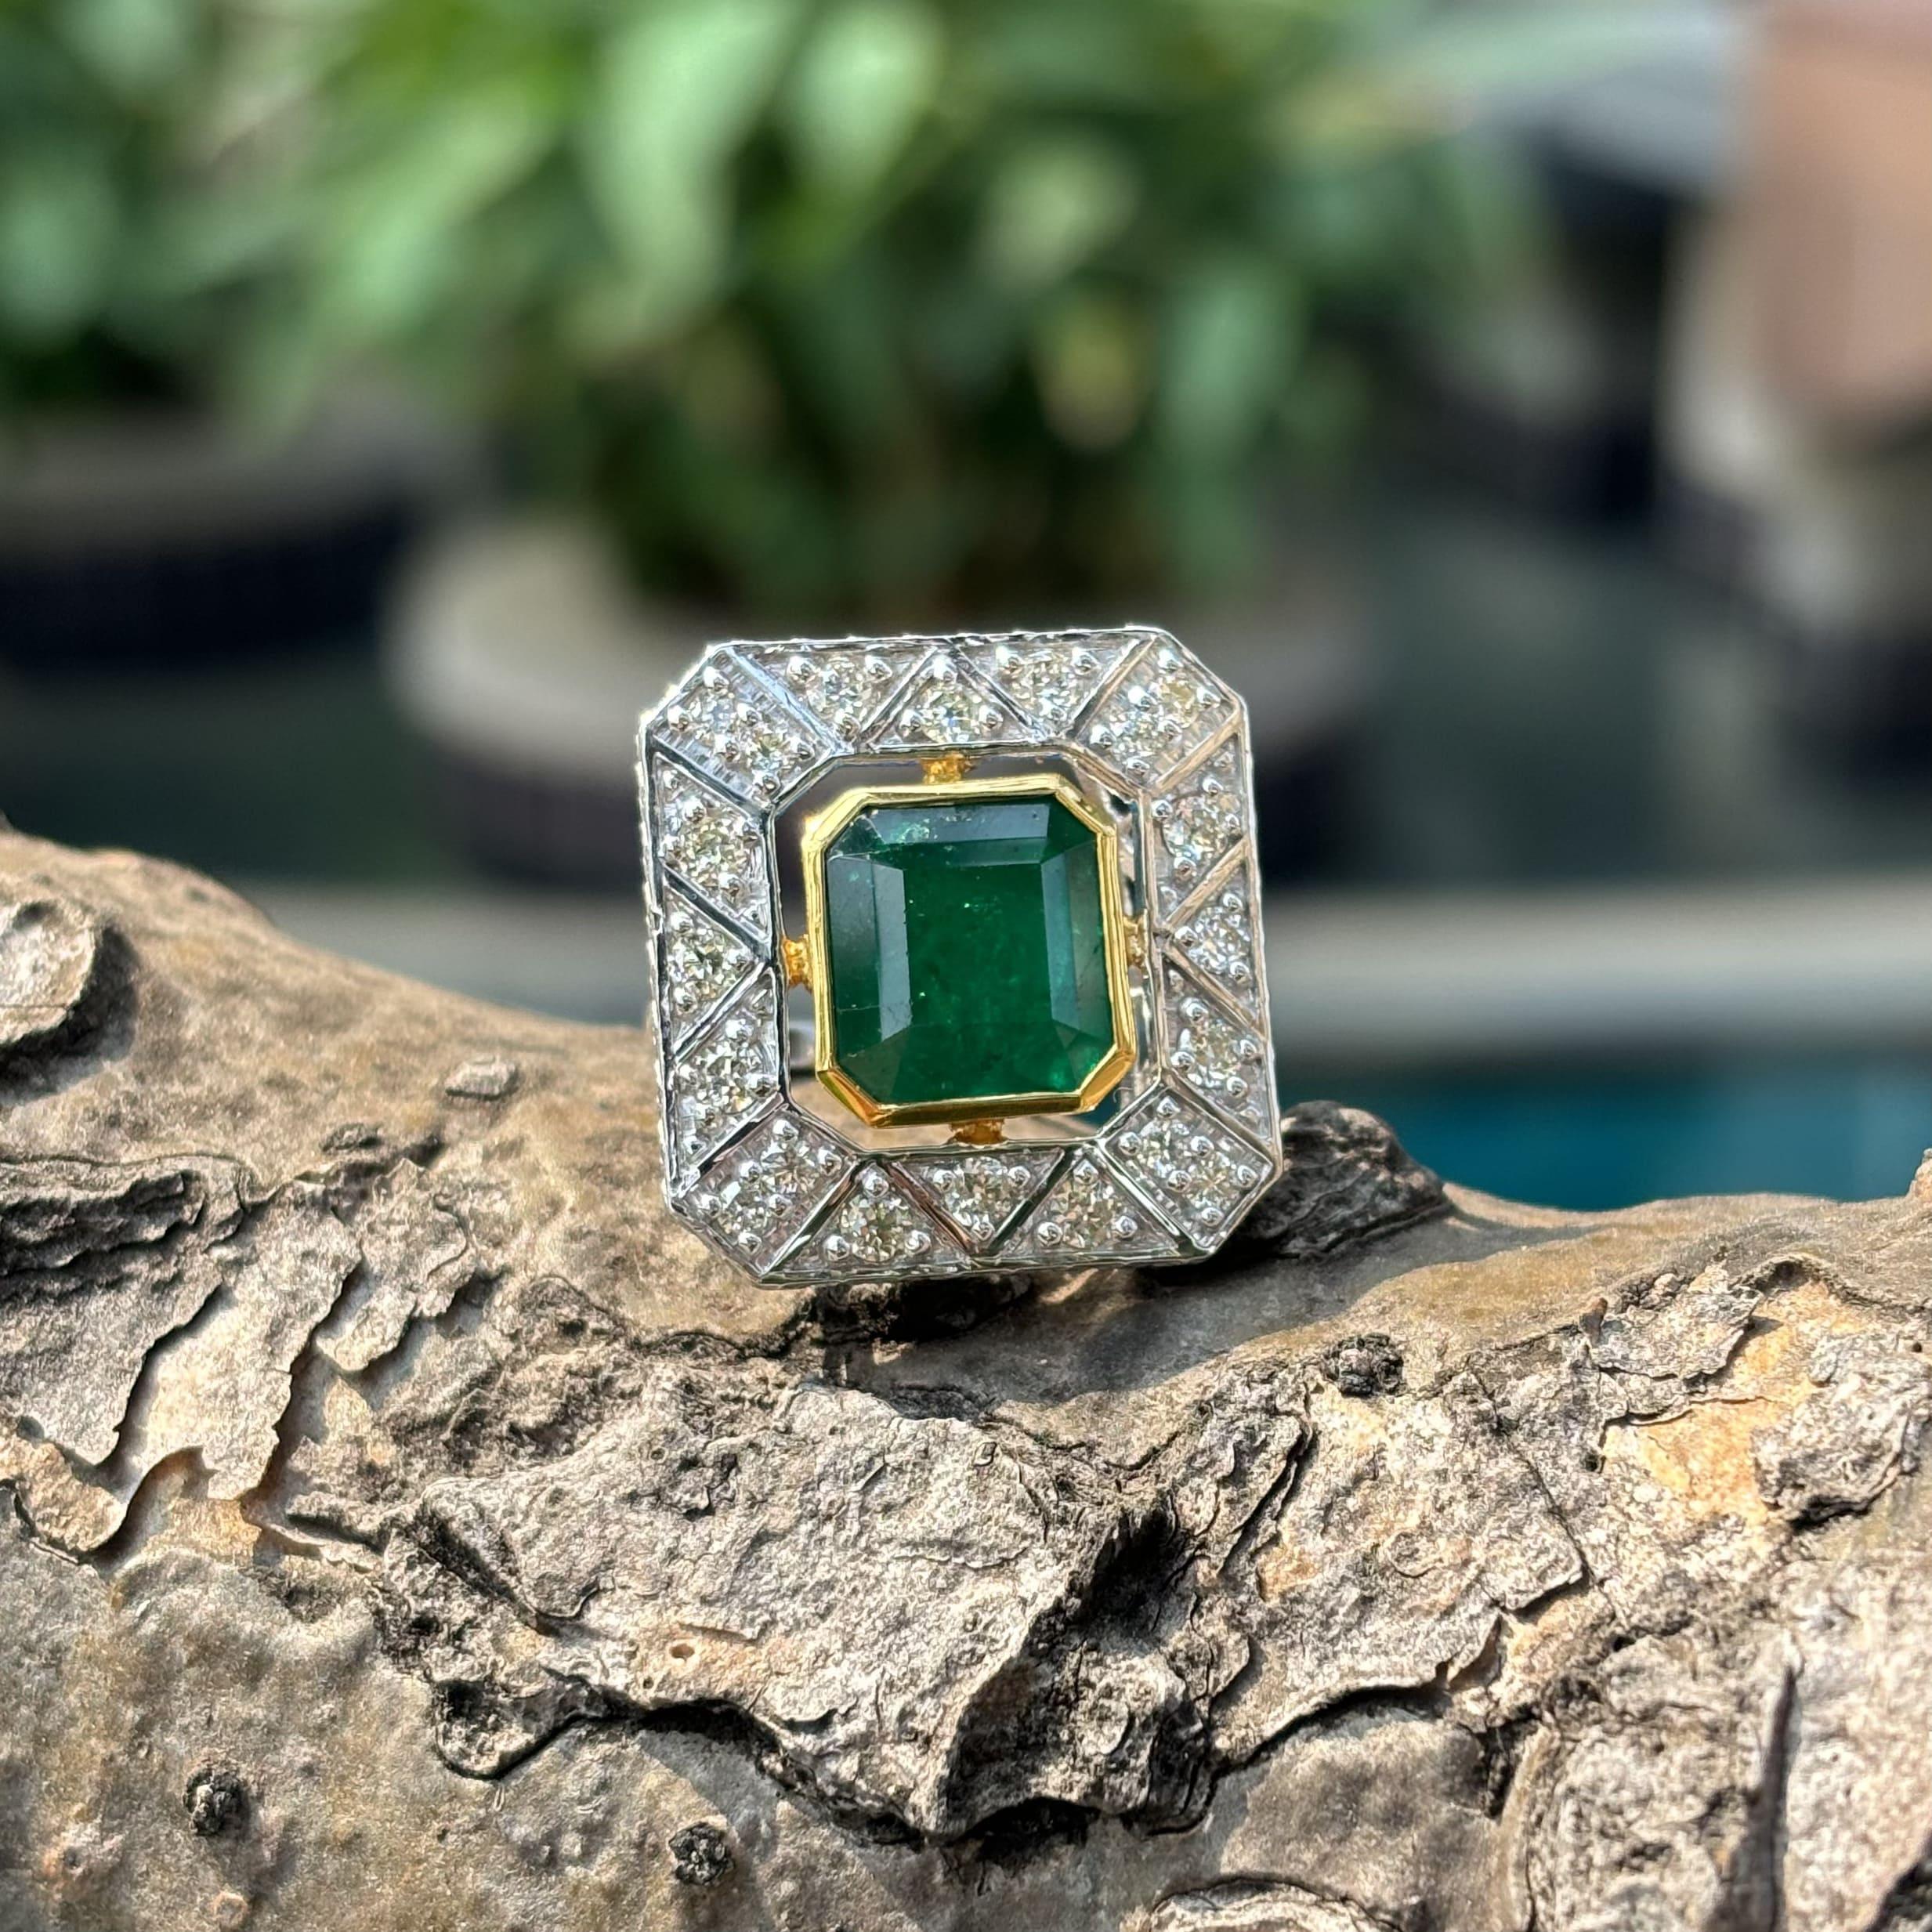 Emerald Cut 5.22 ct Colombian Emerald Art Deco Ring with Old Cut Diamonds in 18K Gold For Sale